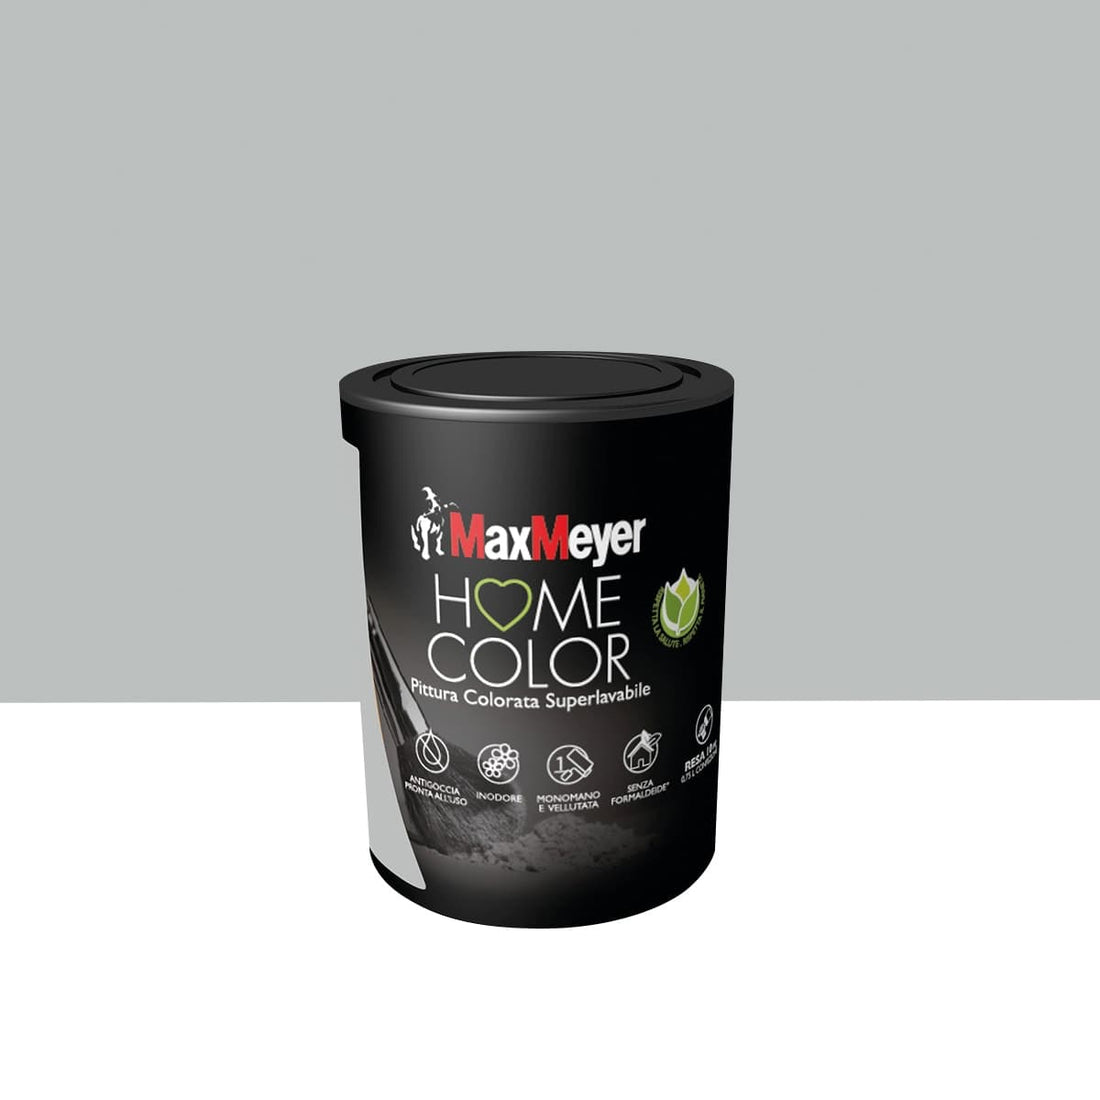 SILVER-GREY SUPERWASHABLE PAINT HOME COLOUR 750 ML - best price from Maltashopper.com BR470003888